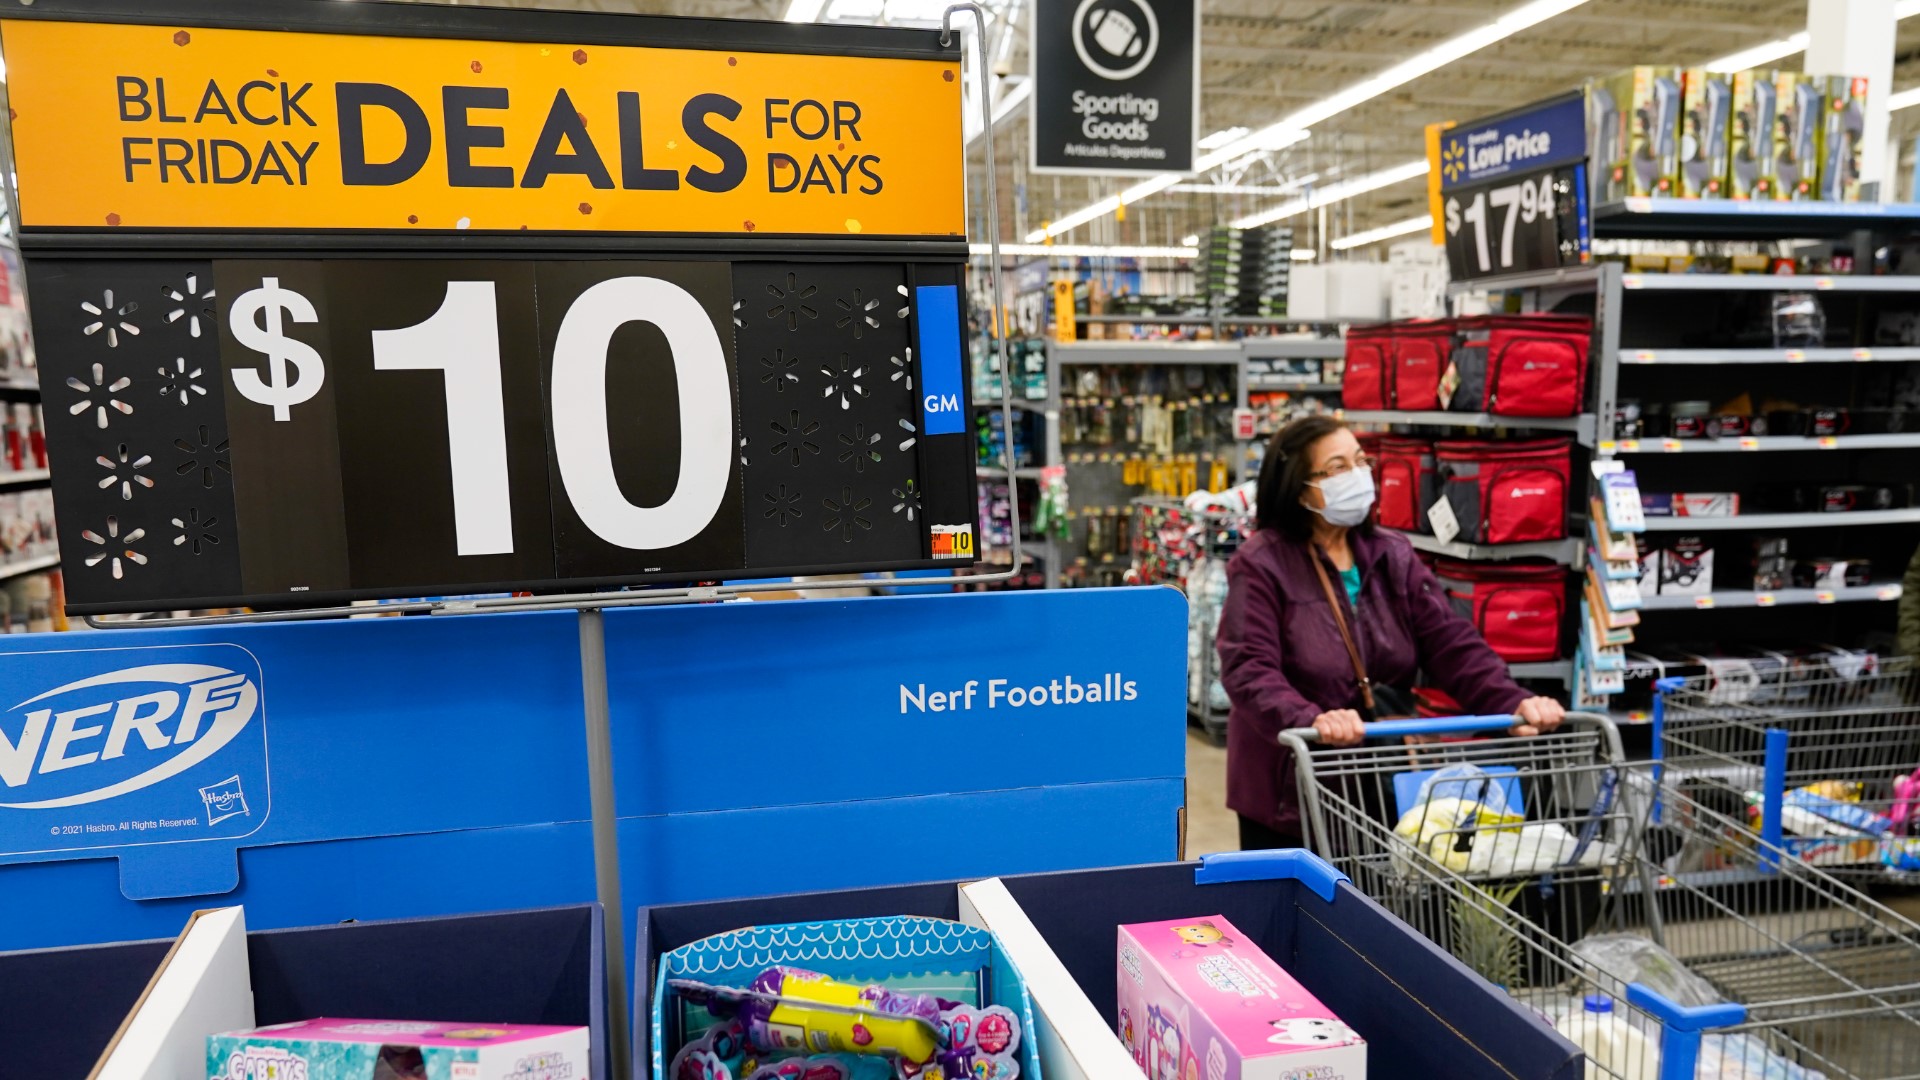 Black Friday and Cyber Monday are coming up. As more deals pop into mailboxes and email inboxes, there are several things to consider before buying.